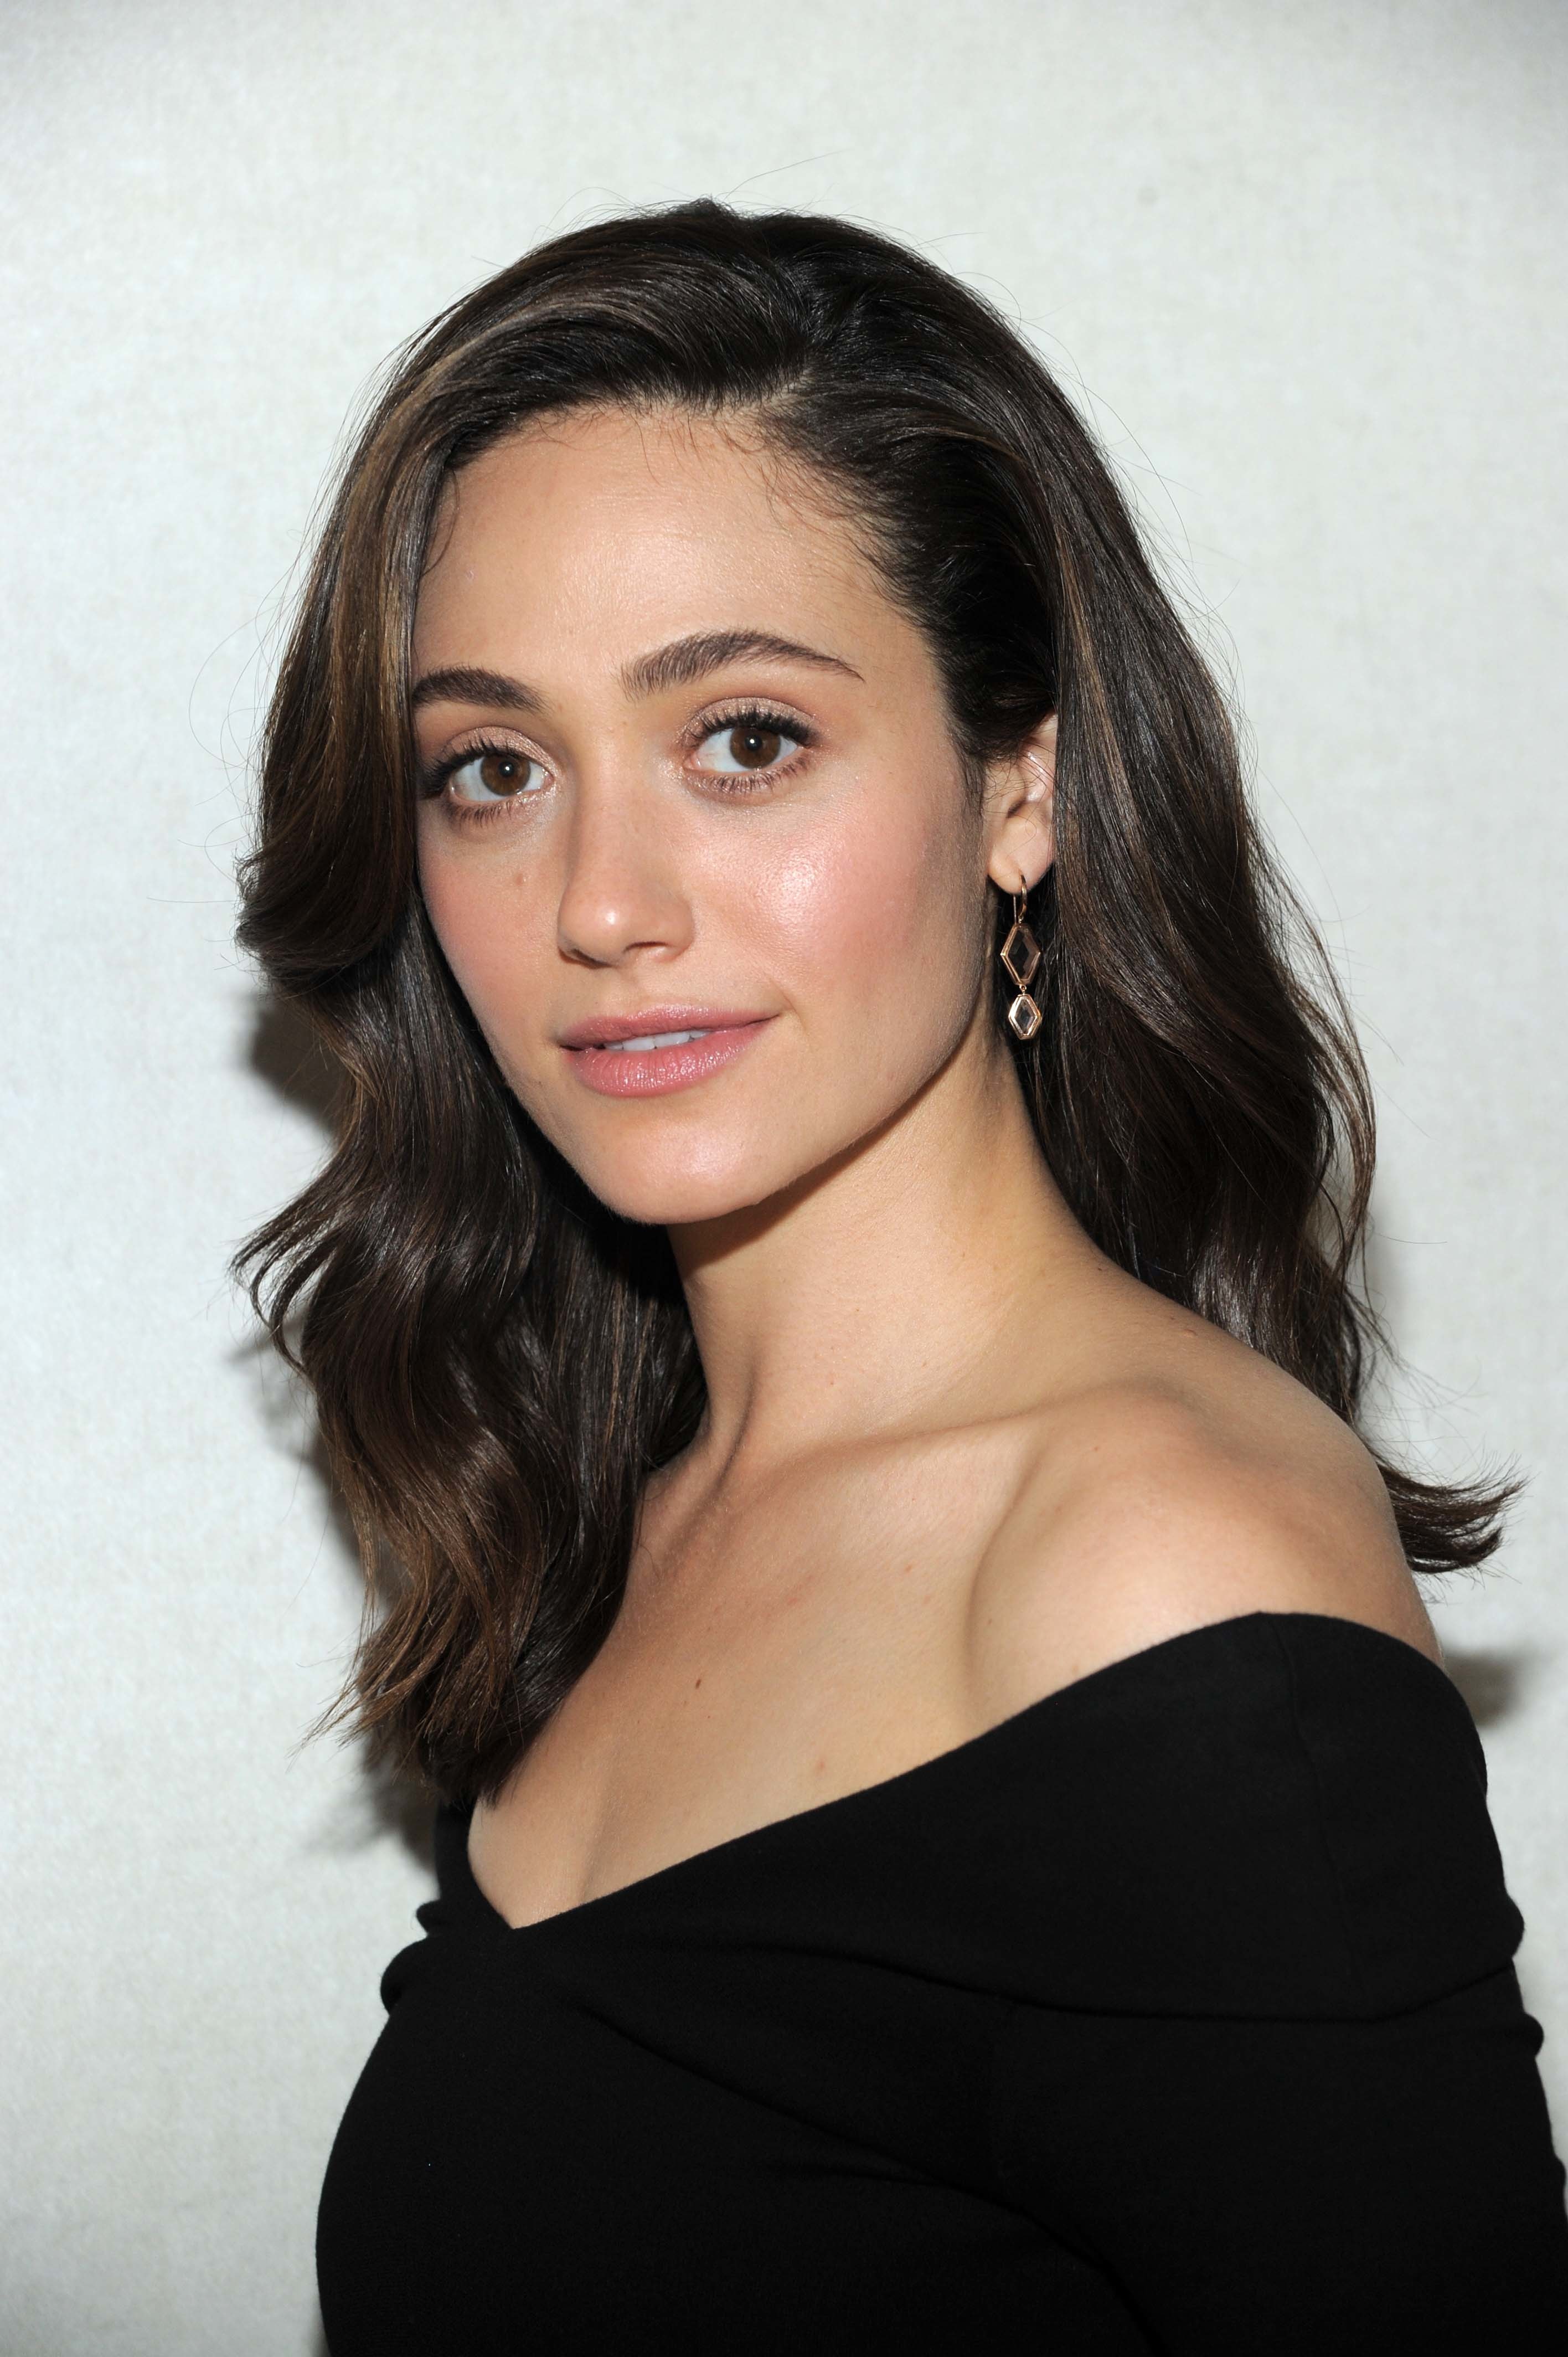 How tall is Emmy Rossum?